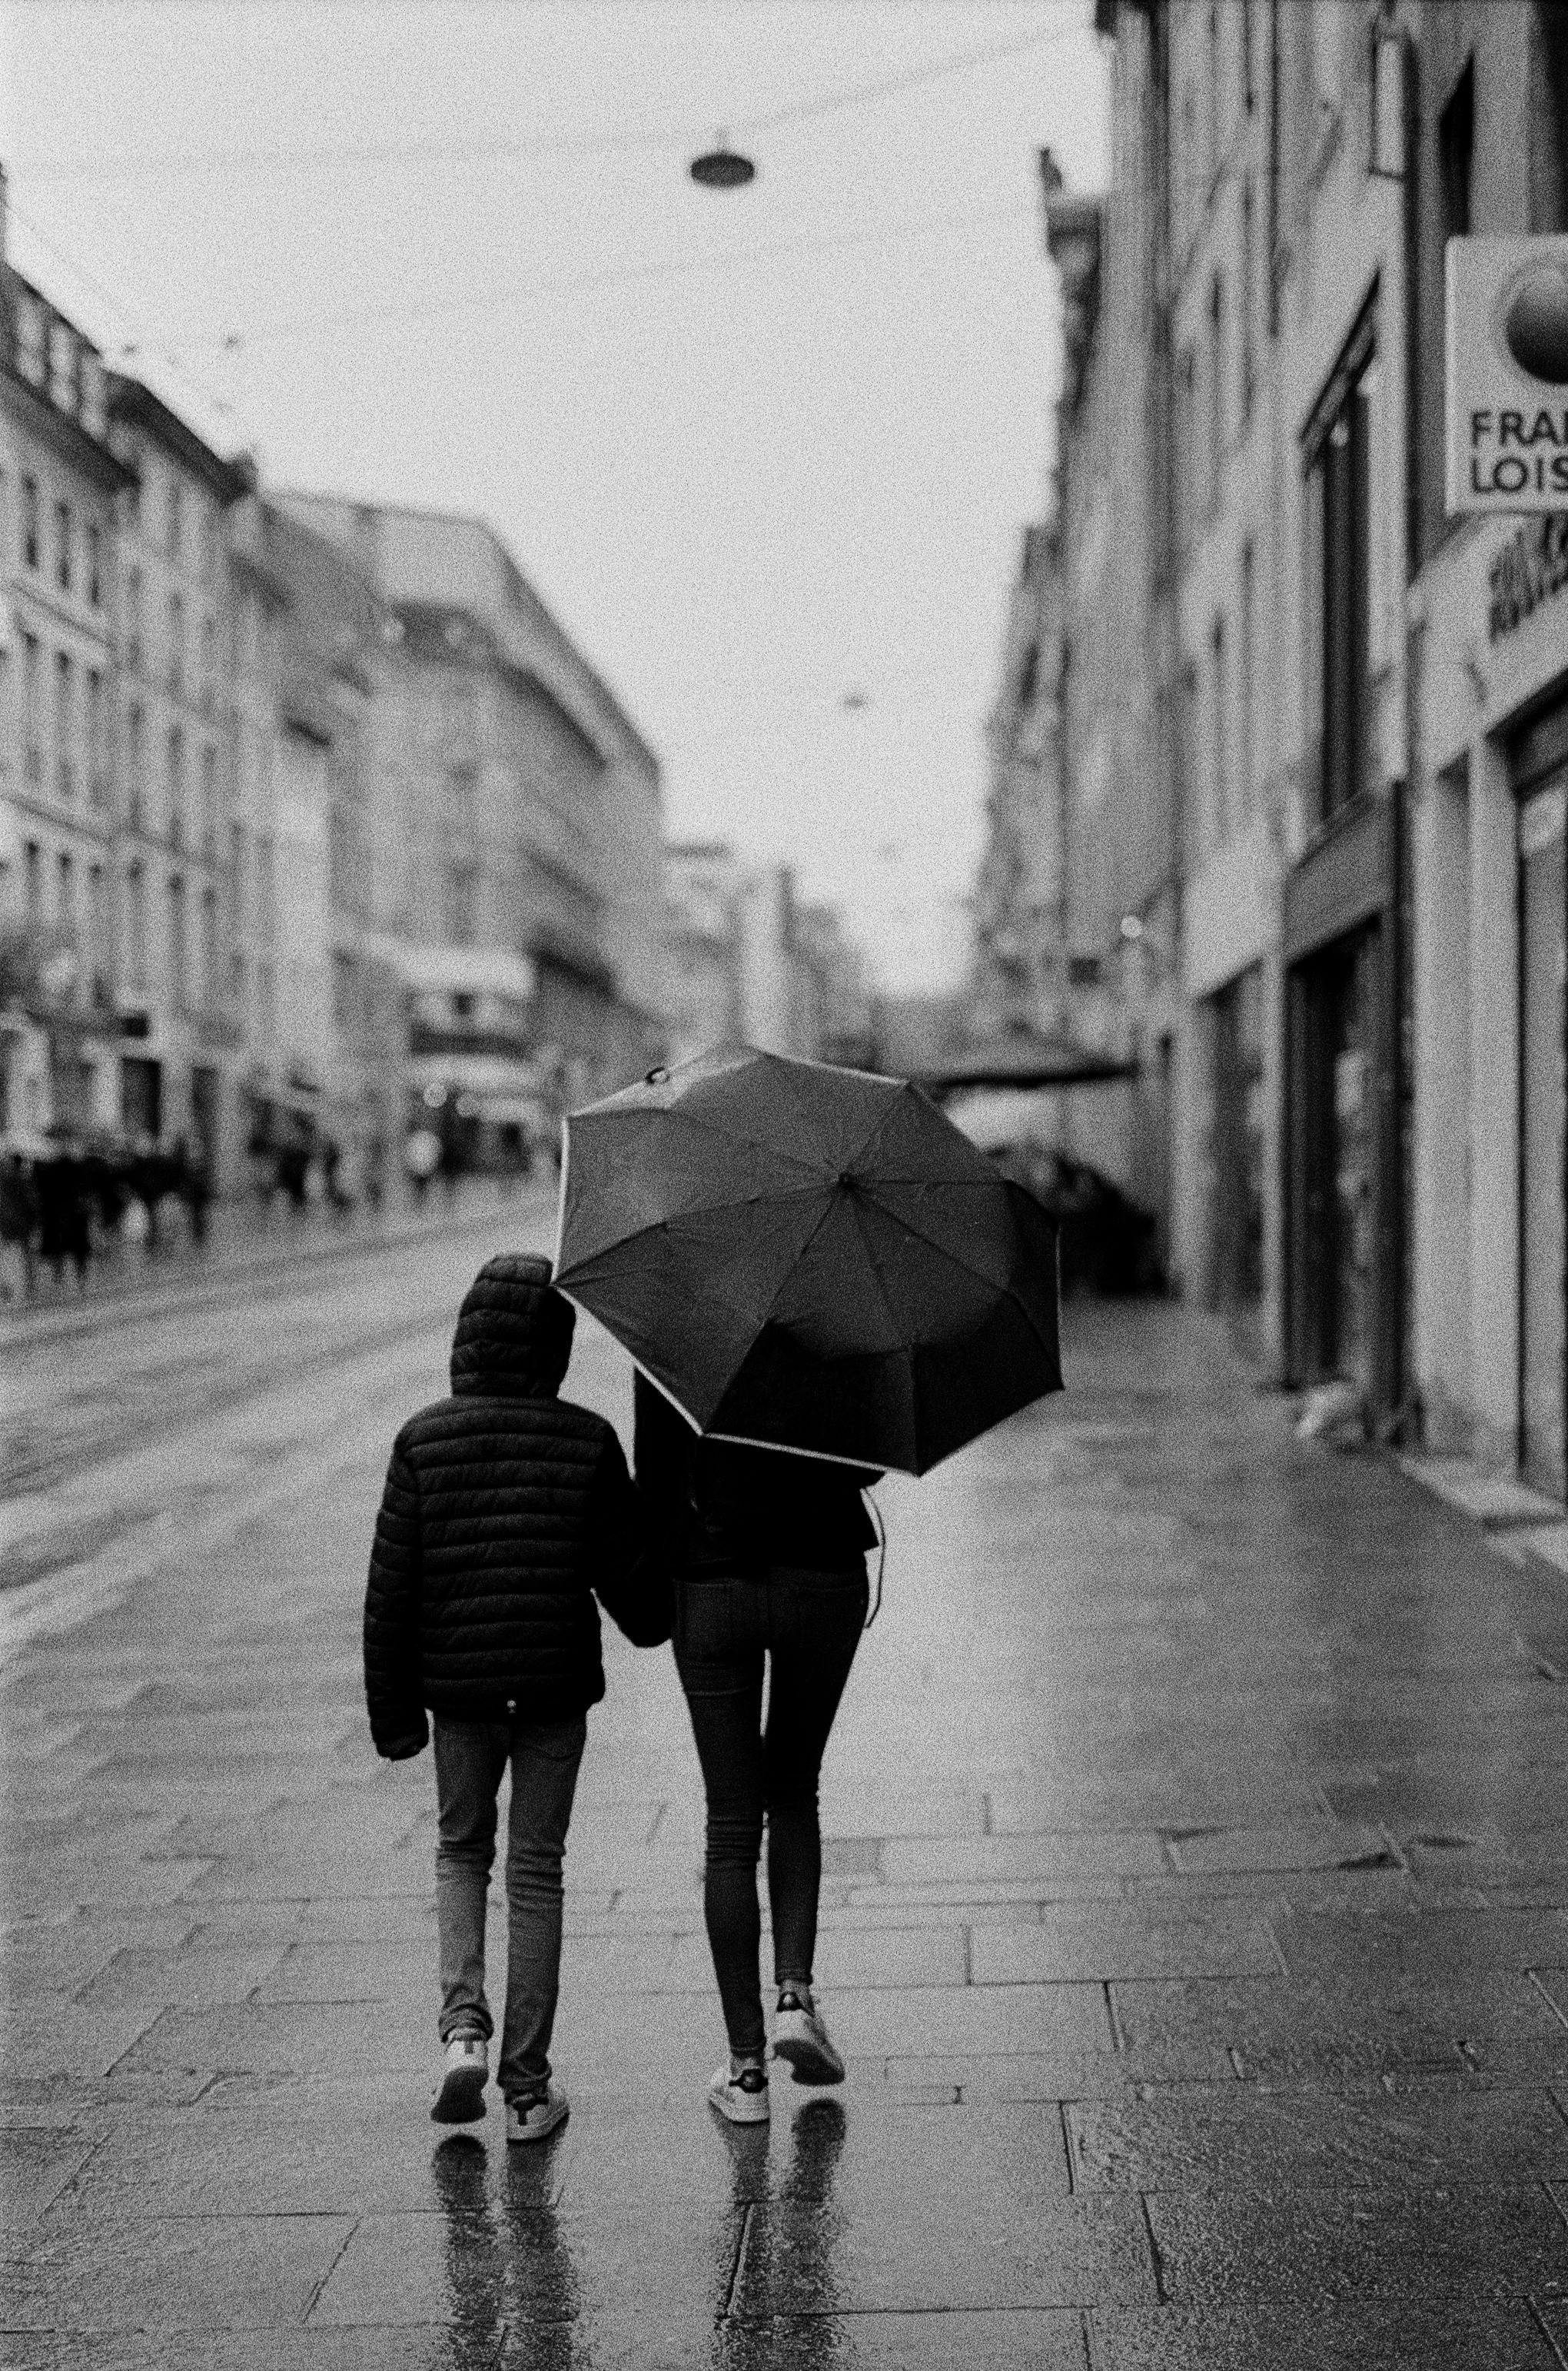 mother and child walking on the street in the rain